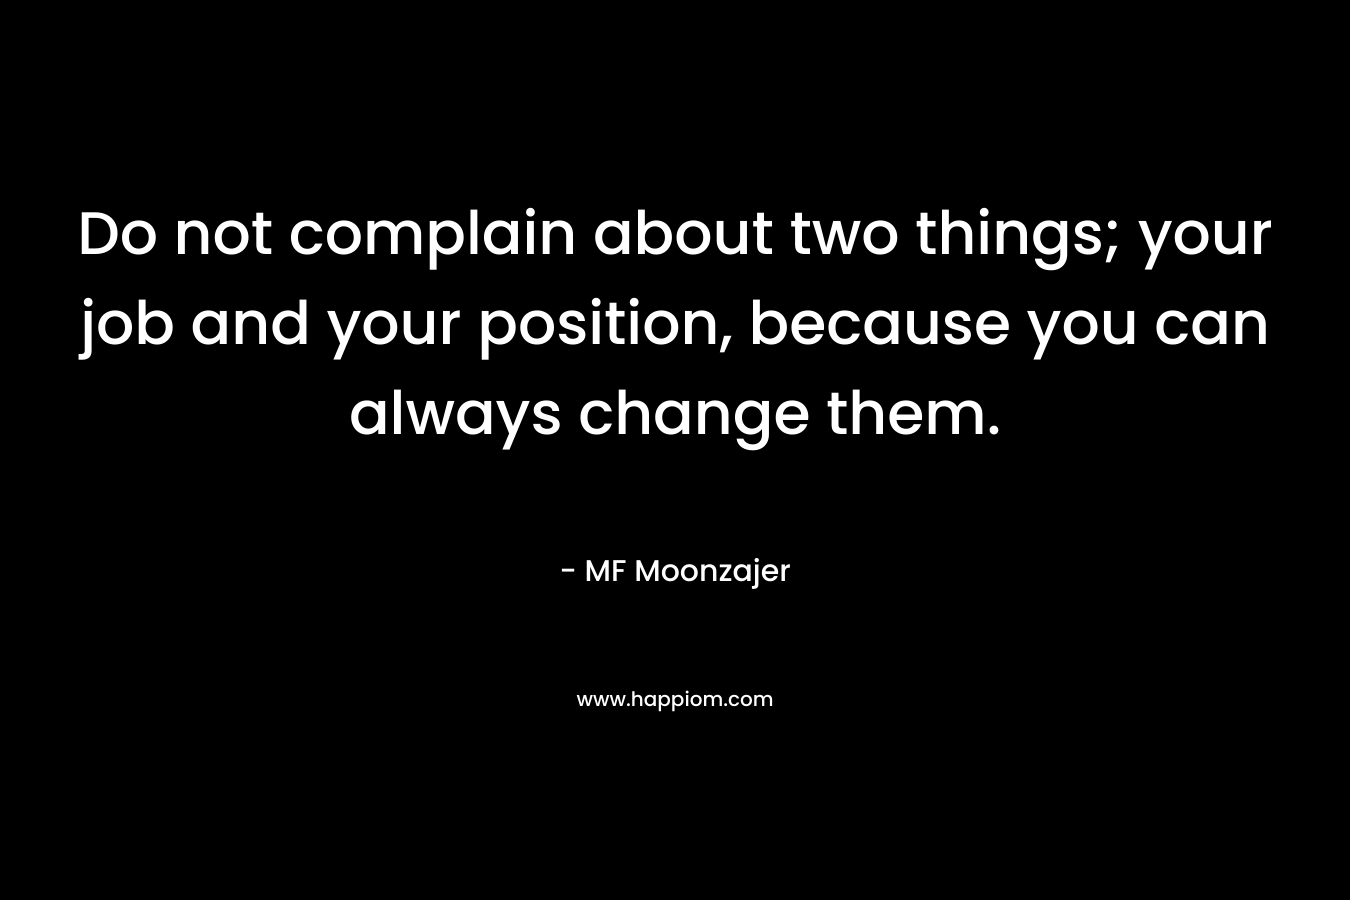 Do not complain about two things; your job and your position, because you can always change them.